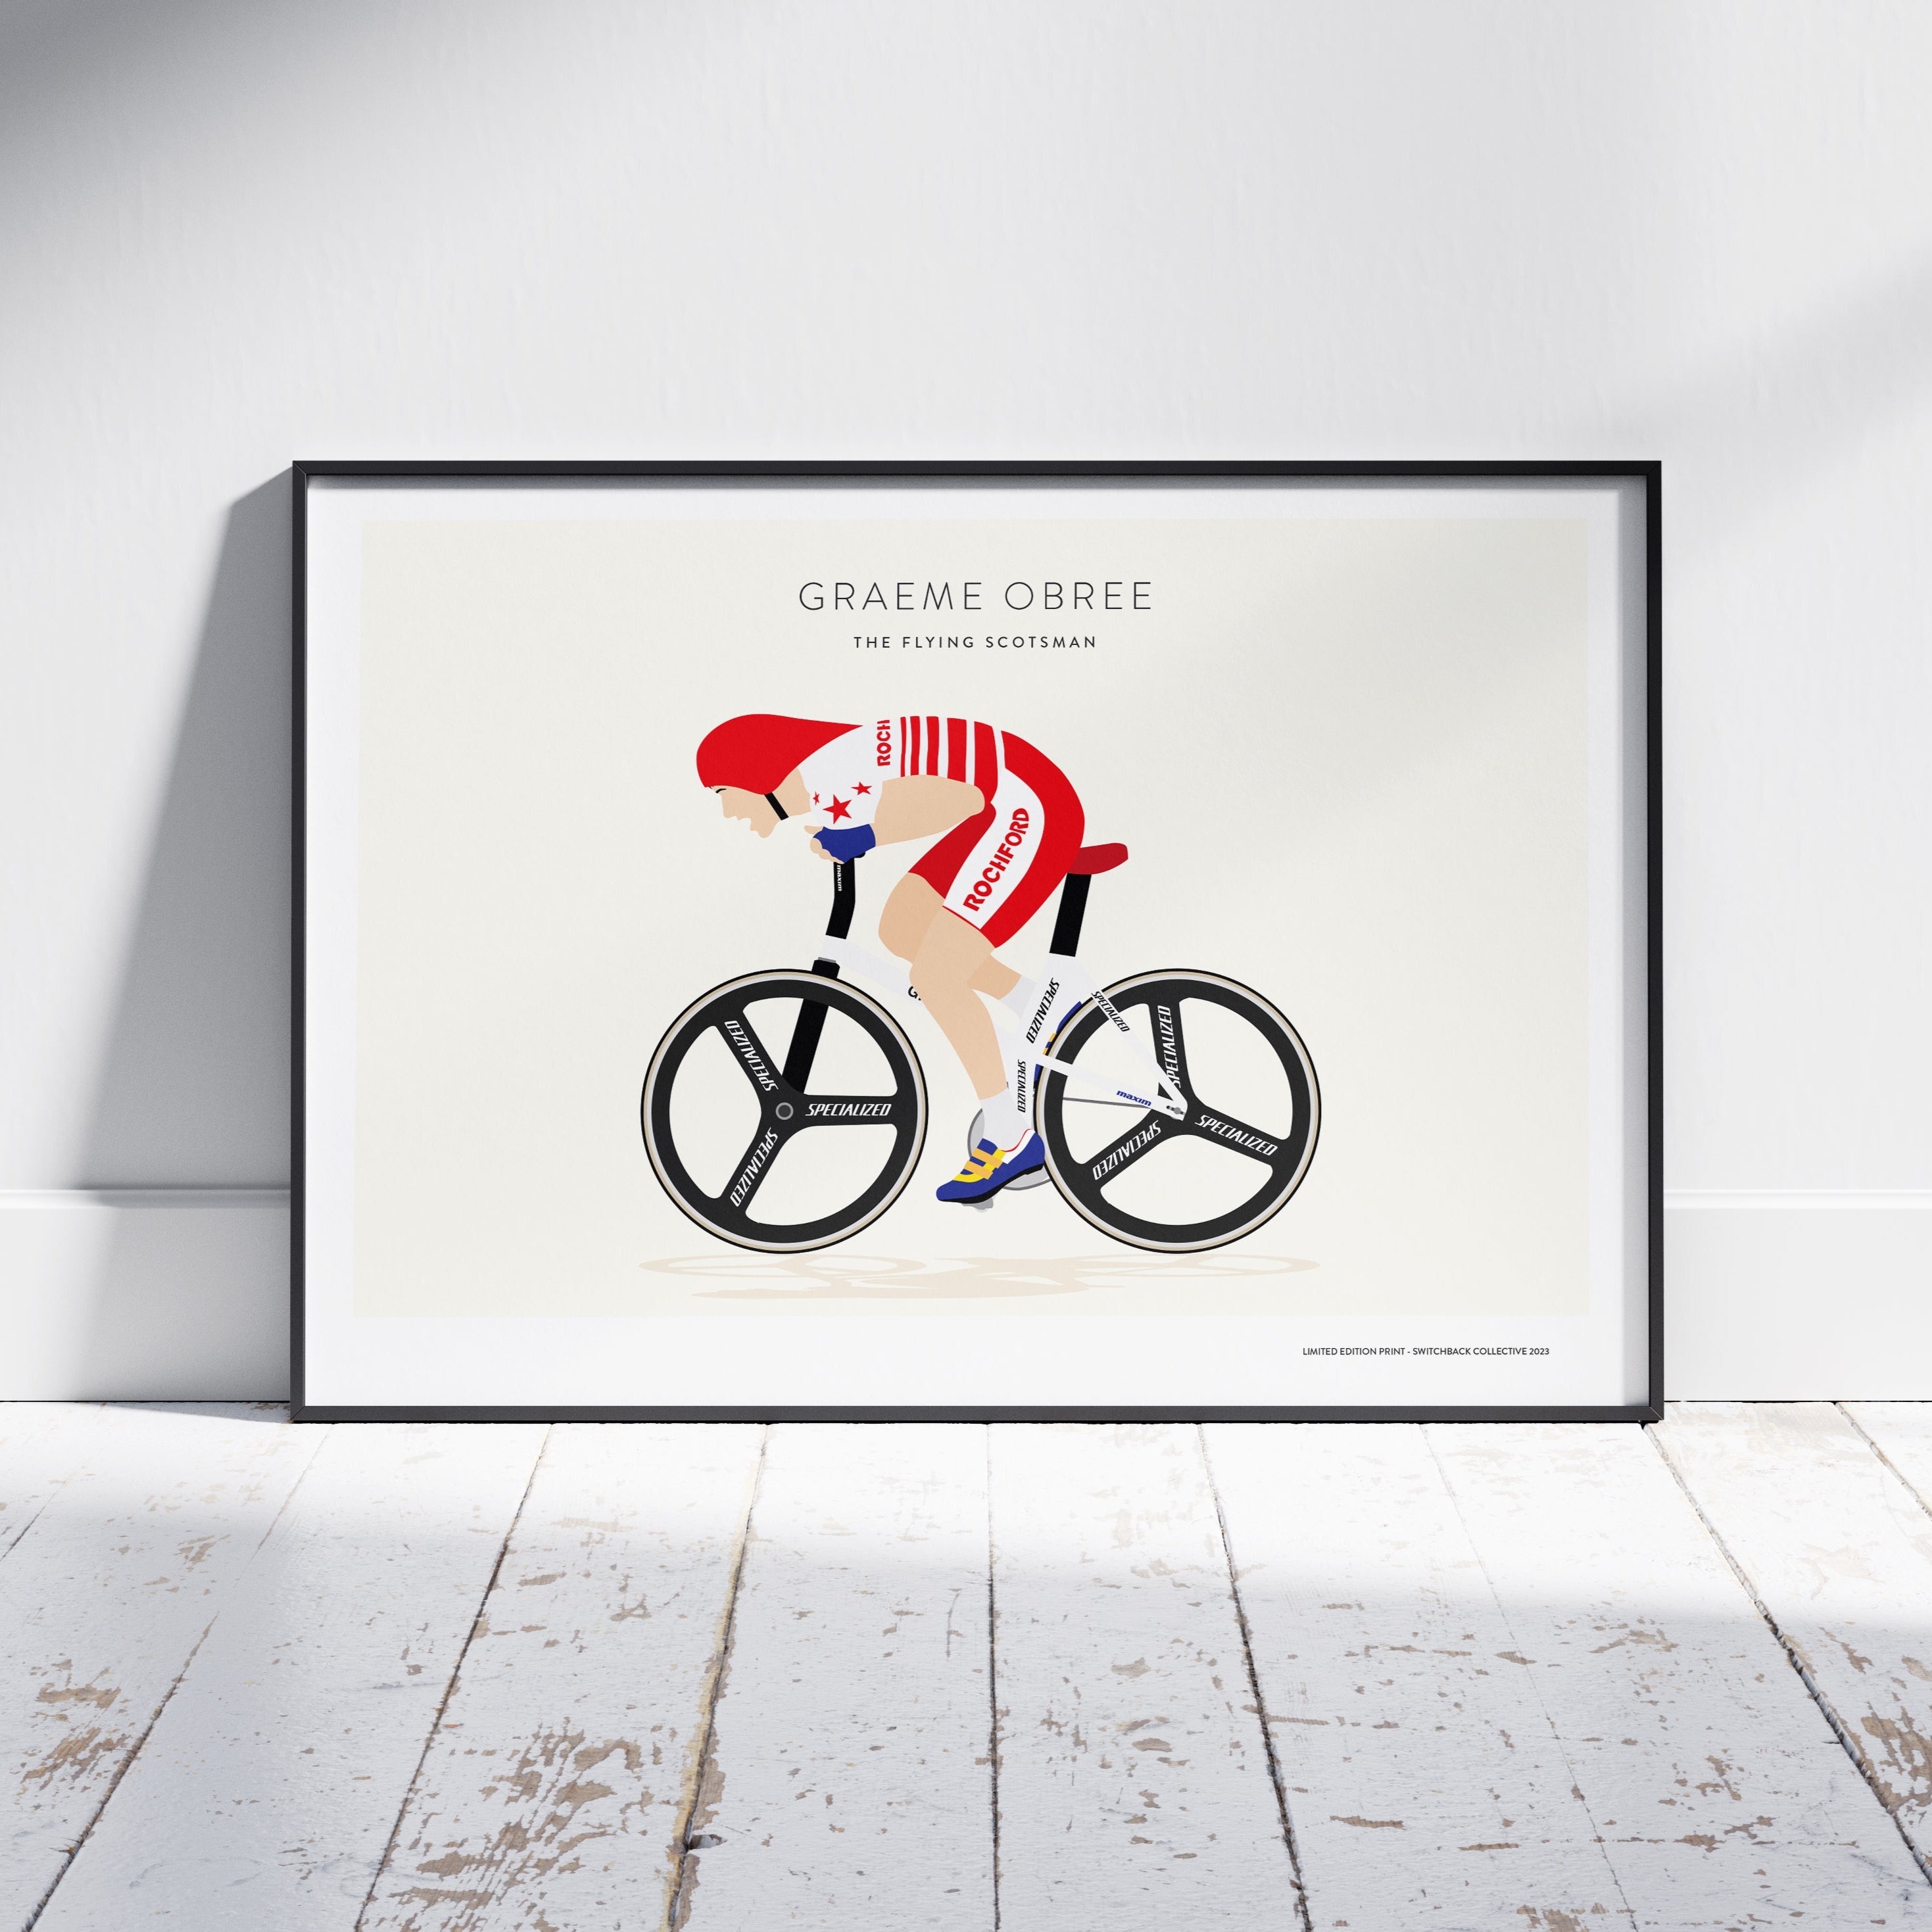 Graeme Obree, The Flying scotsman - Limited Edition Print